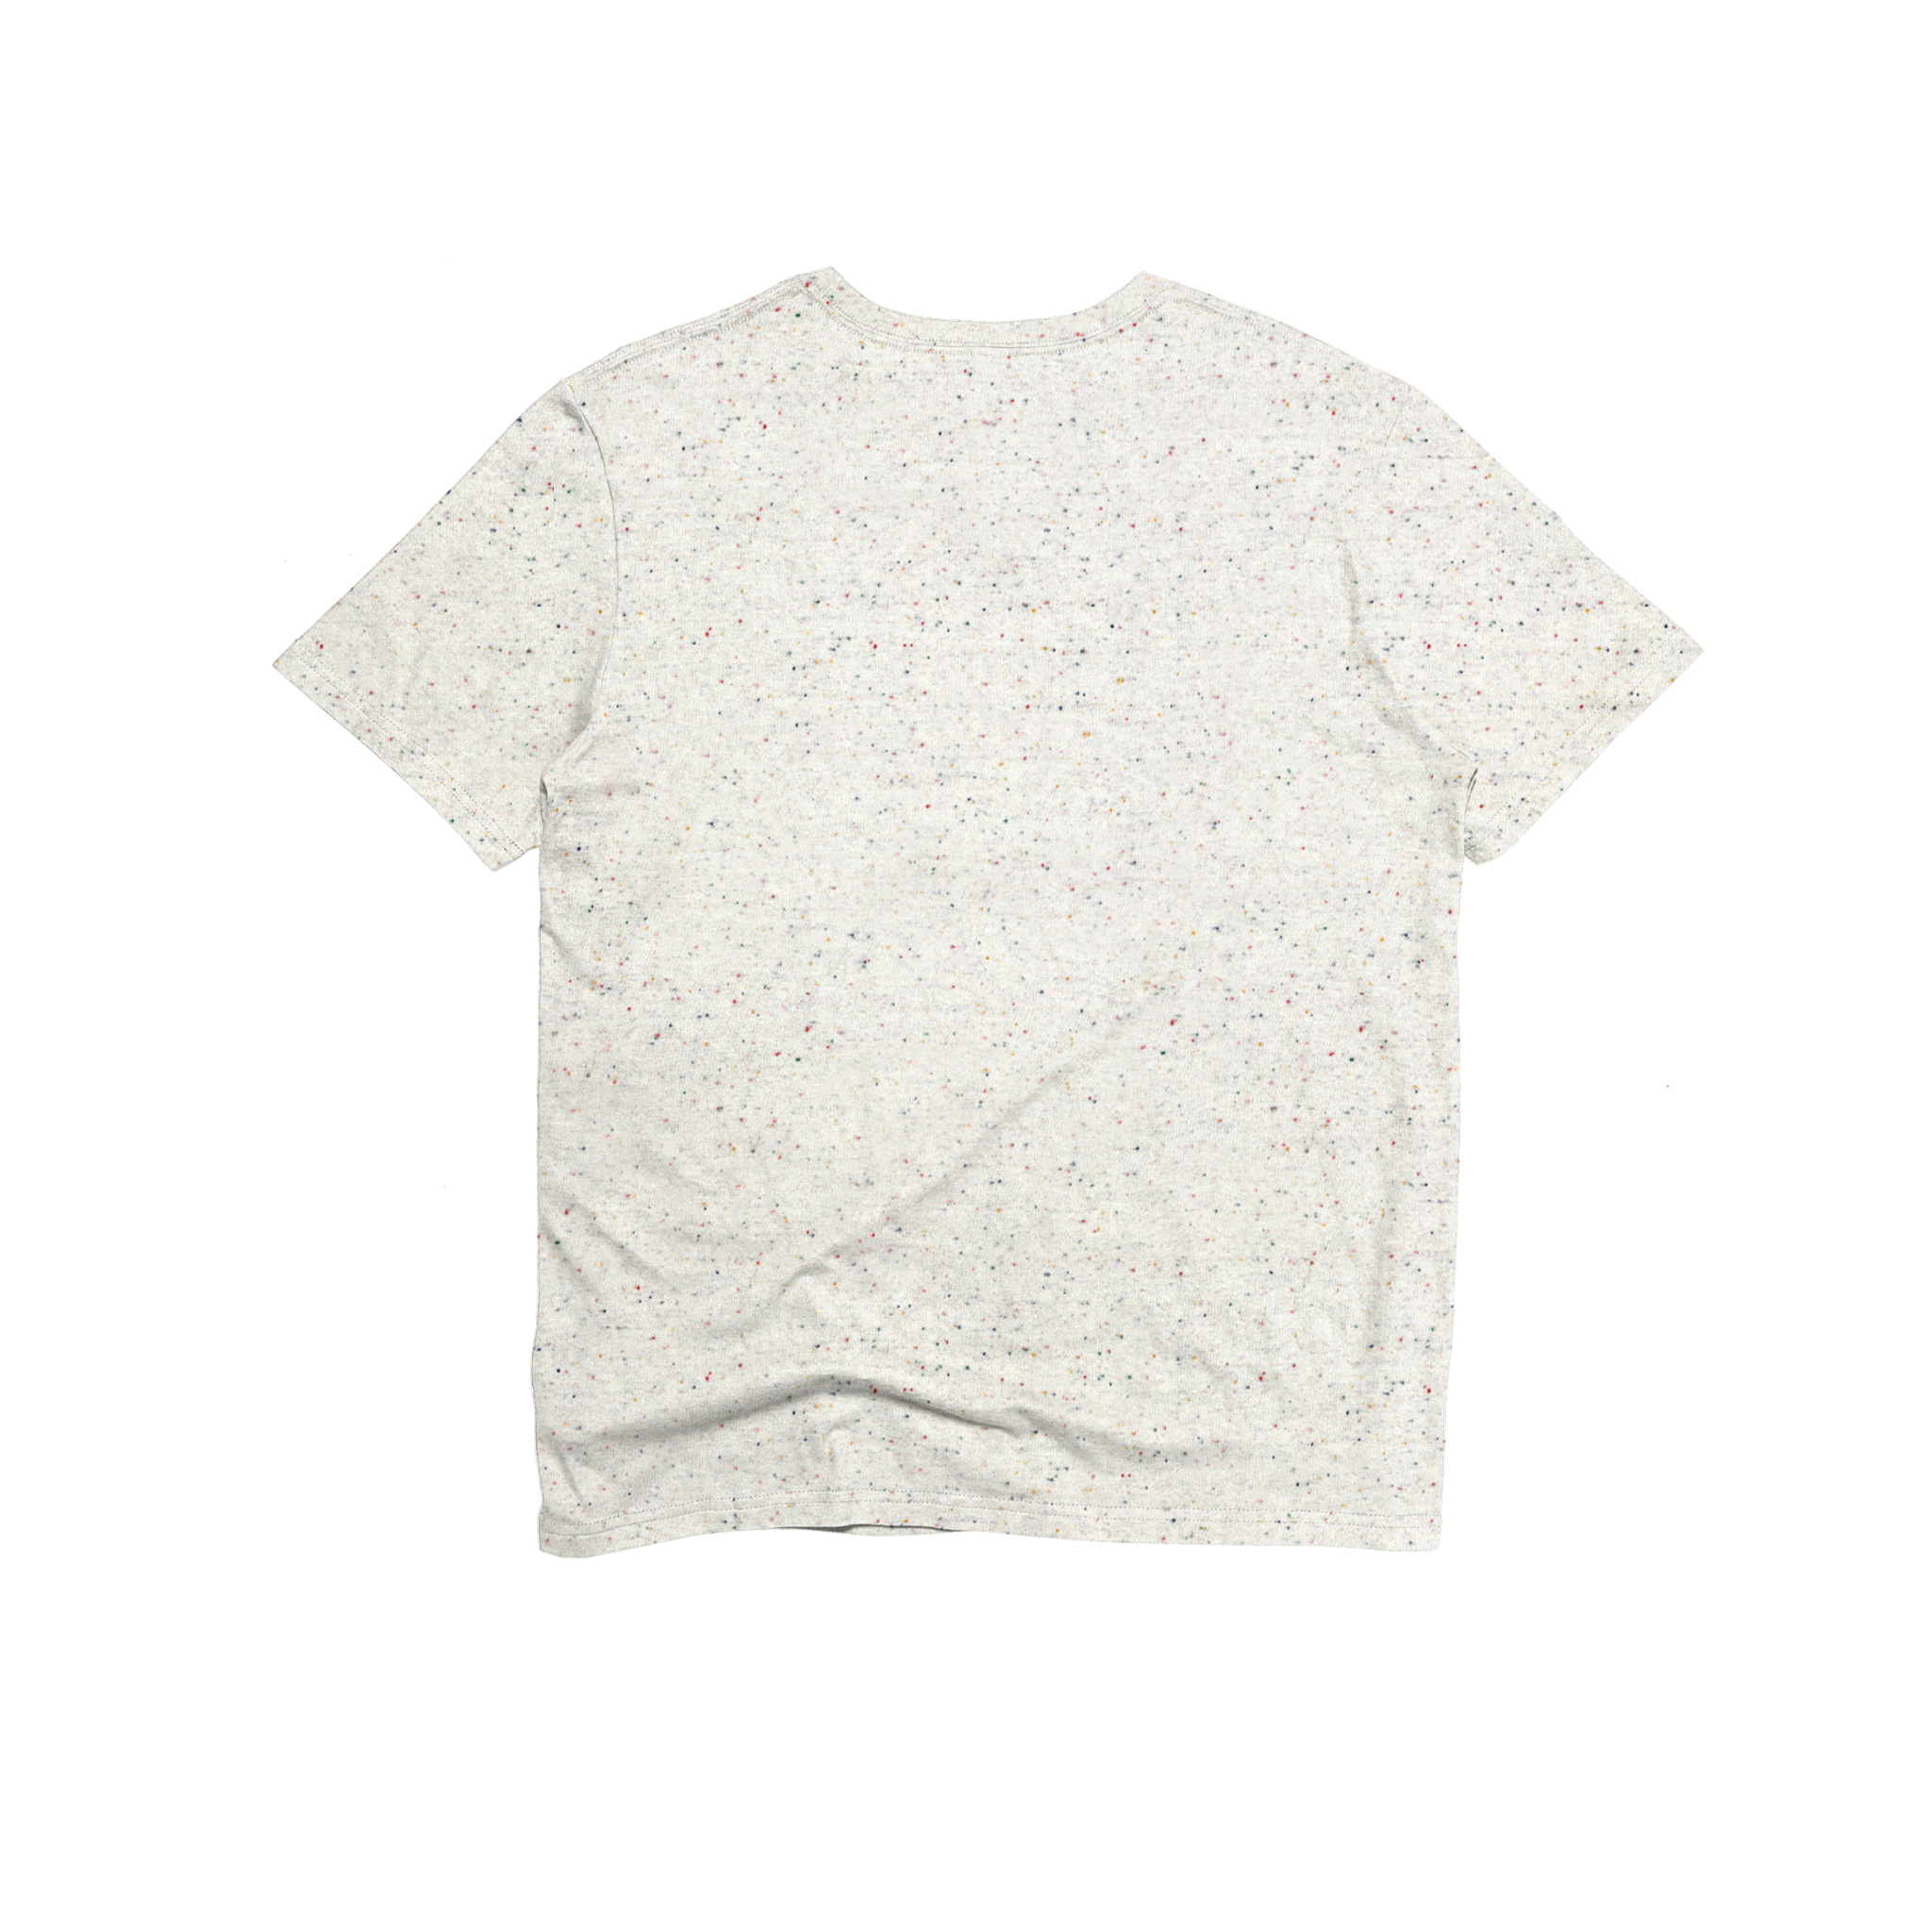 Back Flat Lay of GOEX Unisex and Men's Eco Cotton Tee in Funfetti